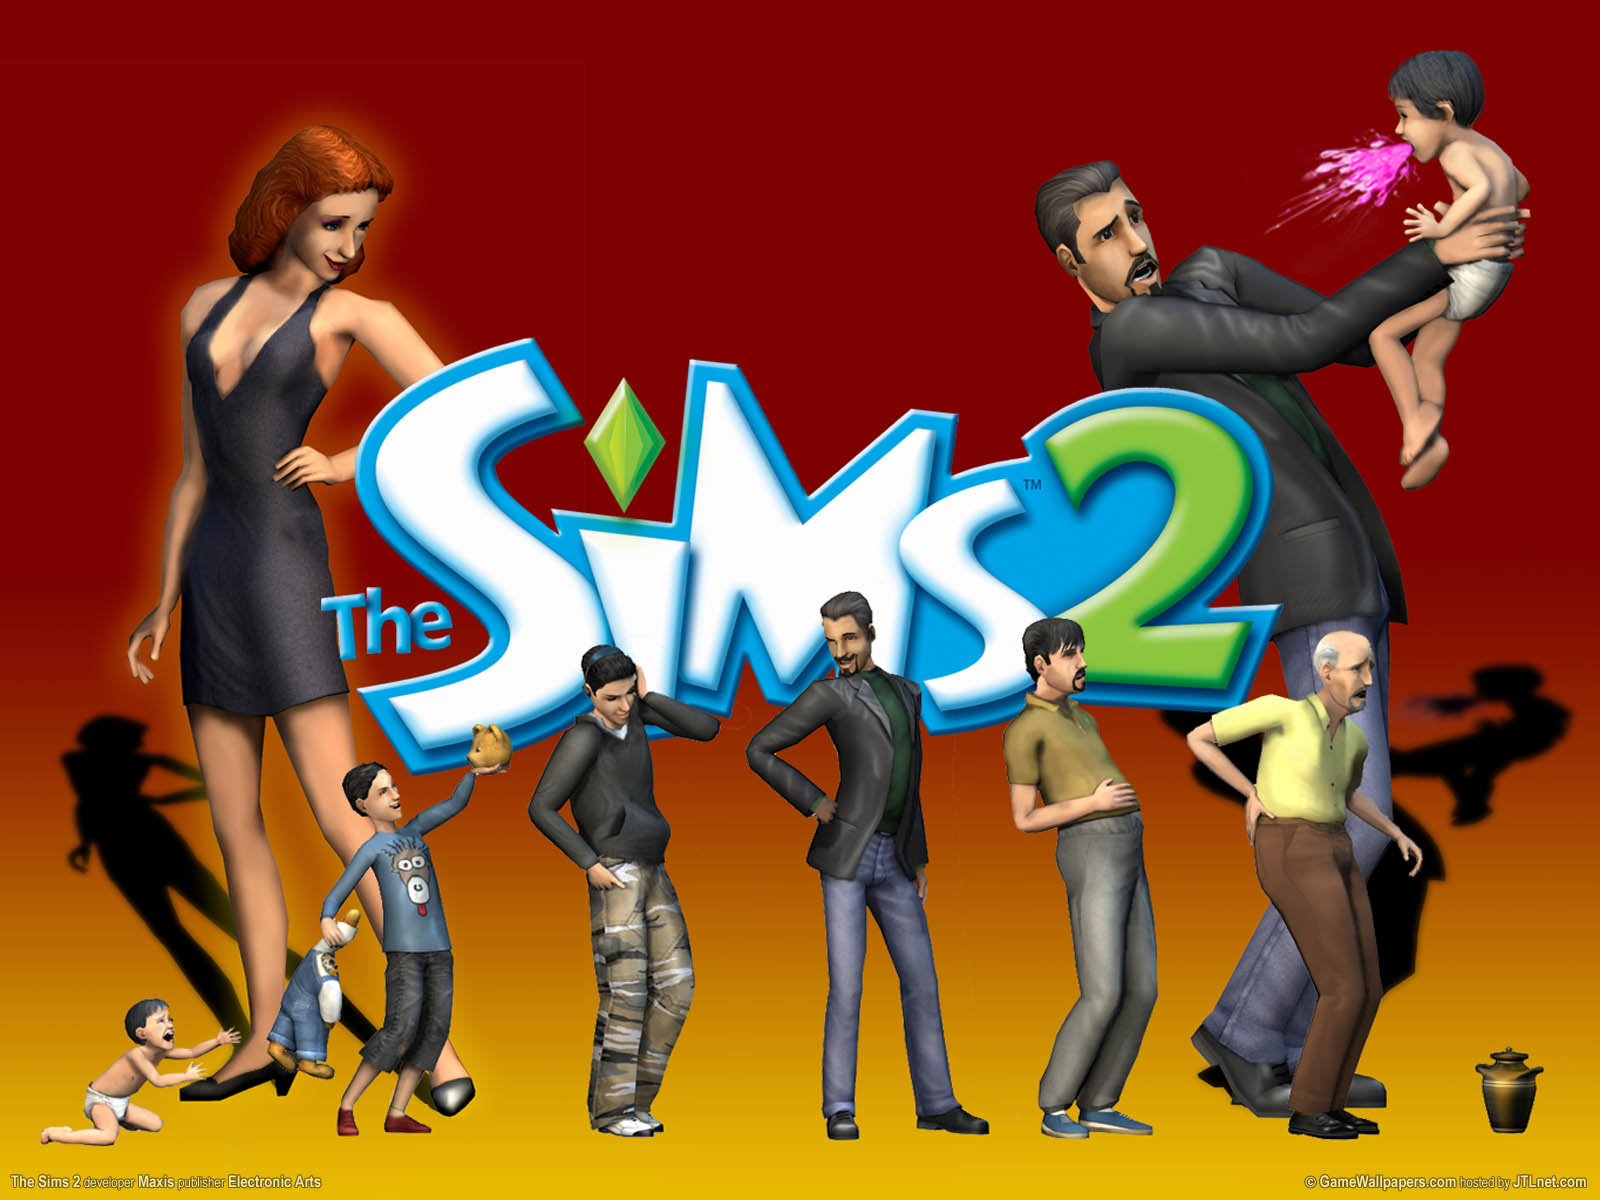 The Sims 2 achtergrond 01 1600x1200